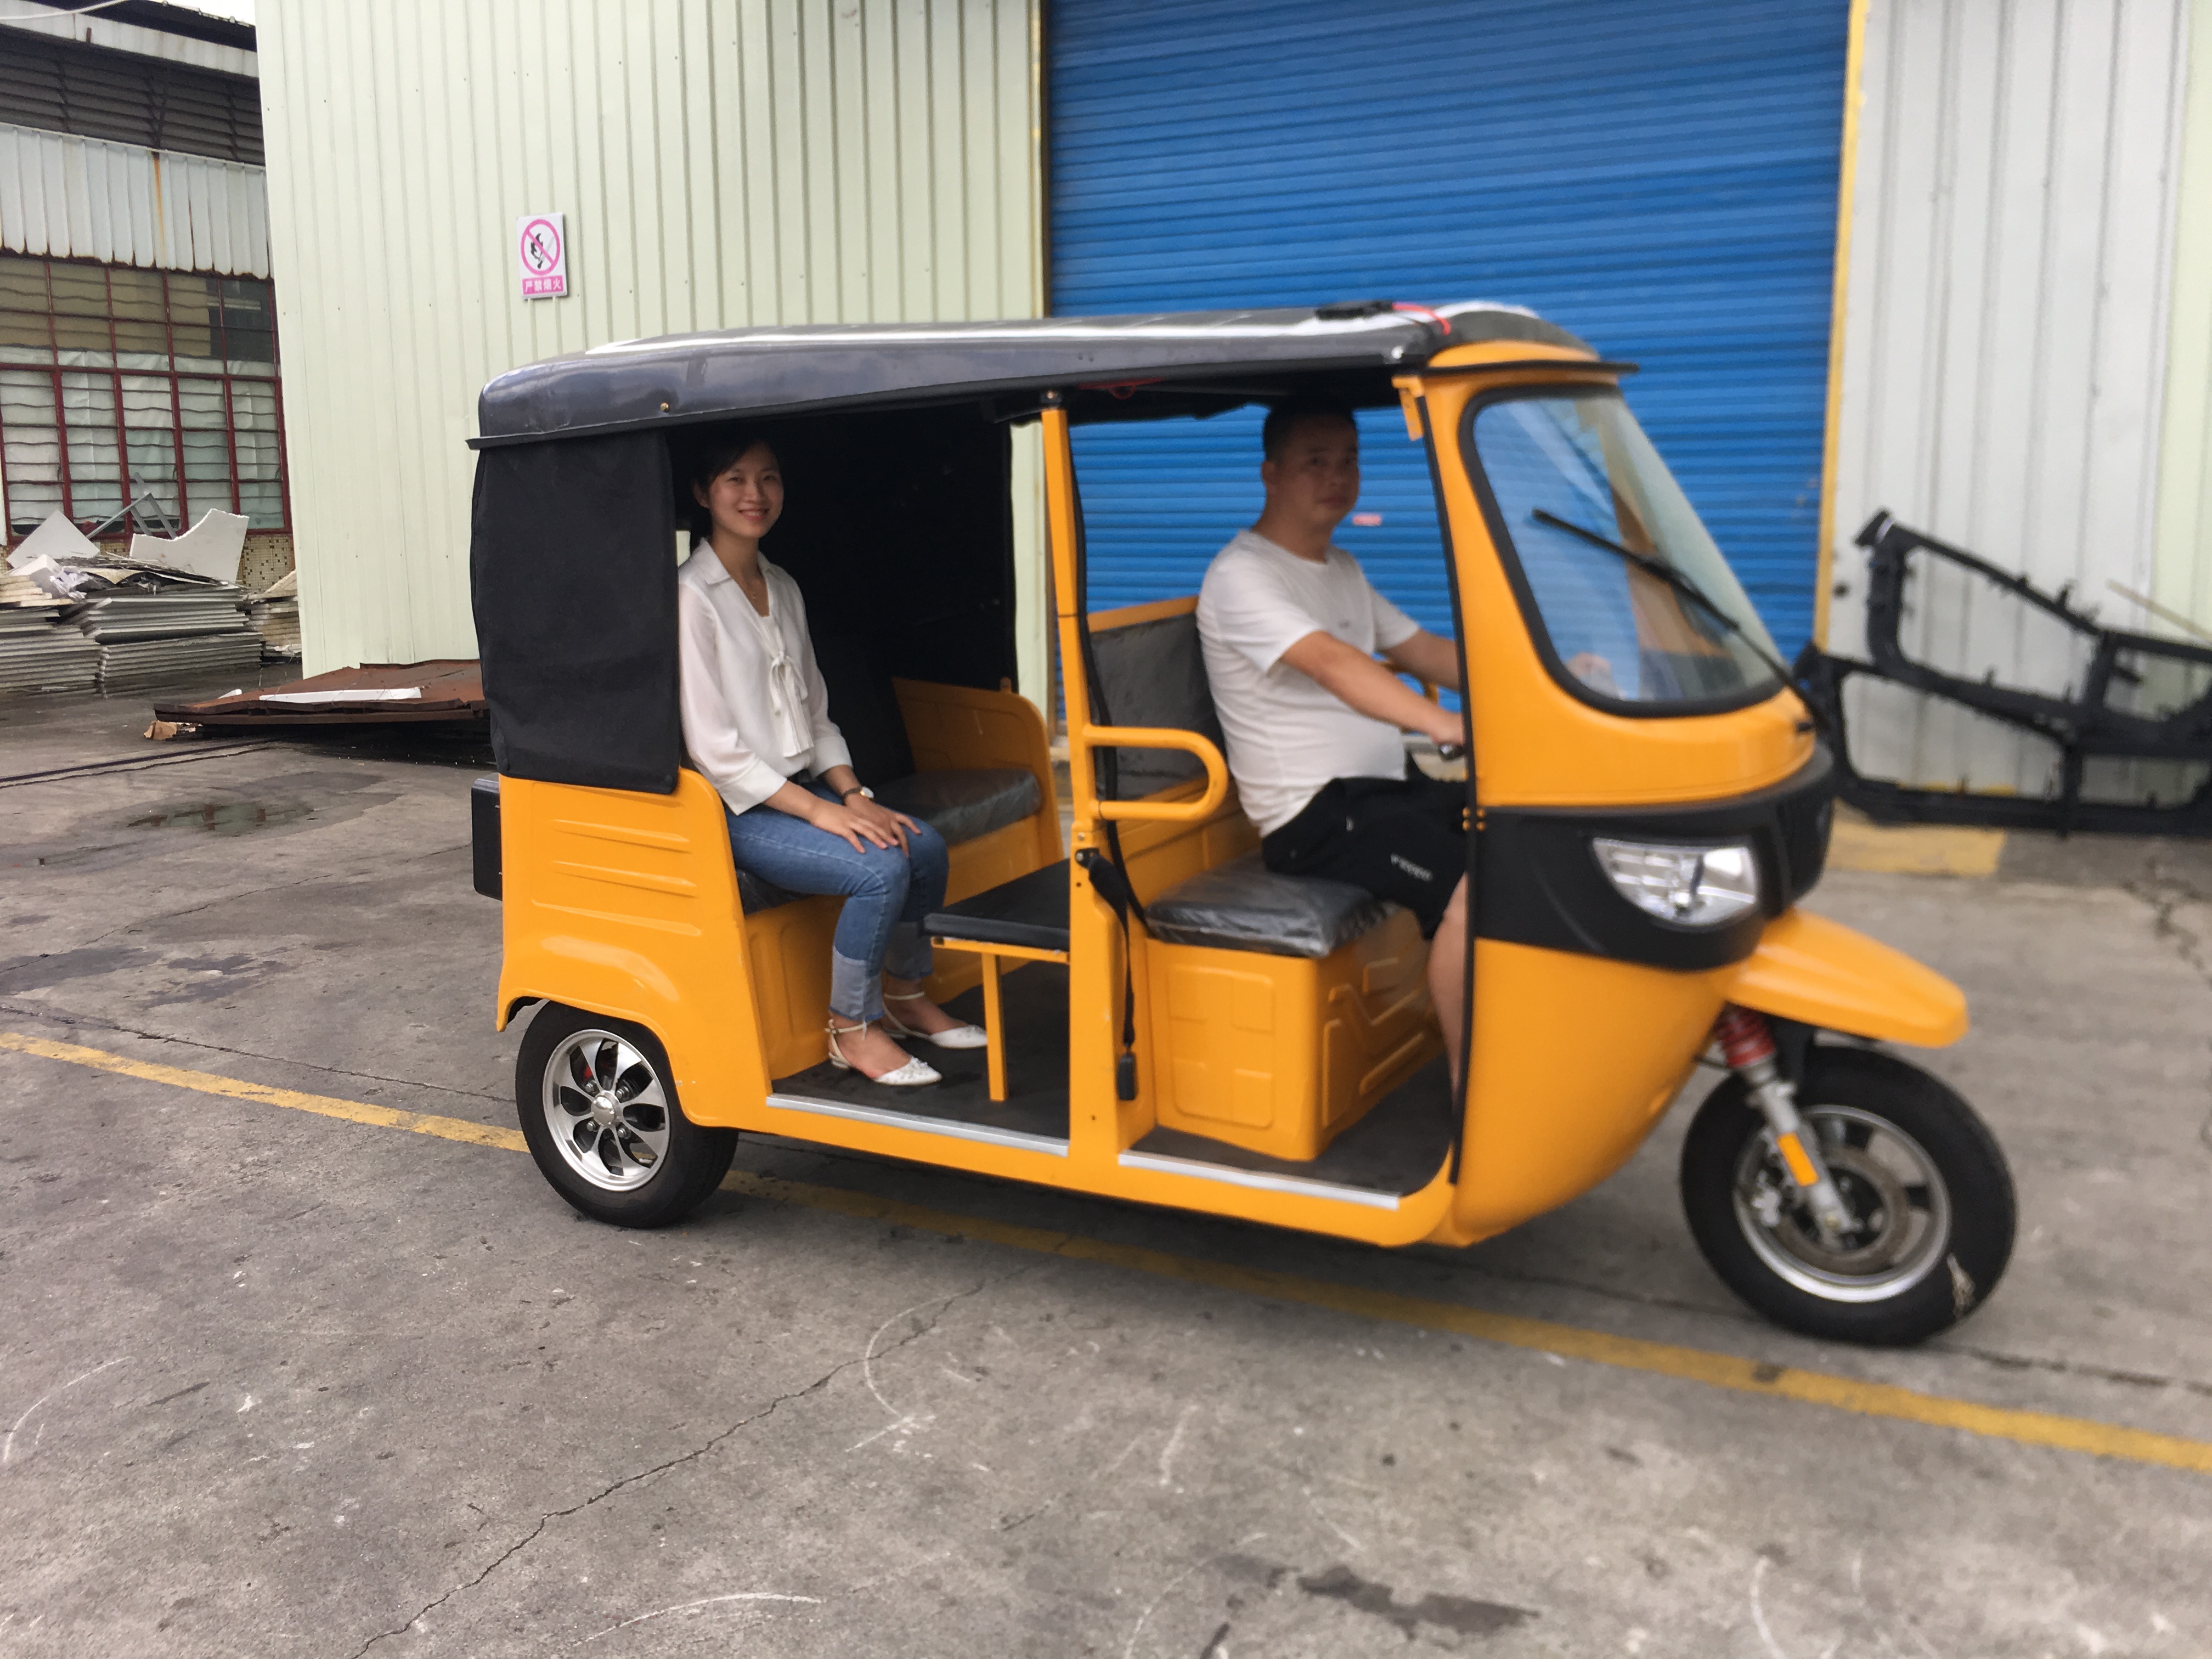 Electric Three Wheels Cargo Bike 4 Persons Passenger Tricycle Tuk Tuk Car Gasoline With Battery